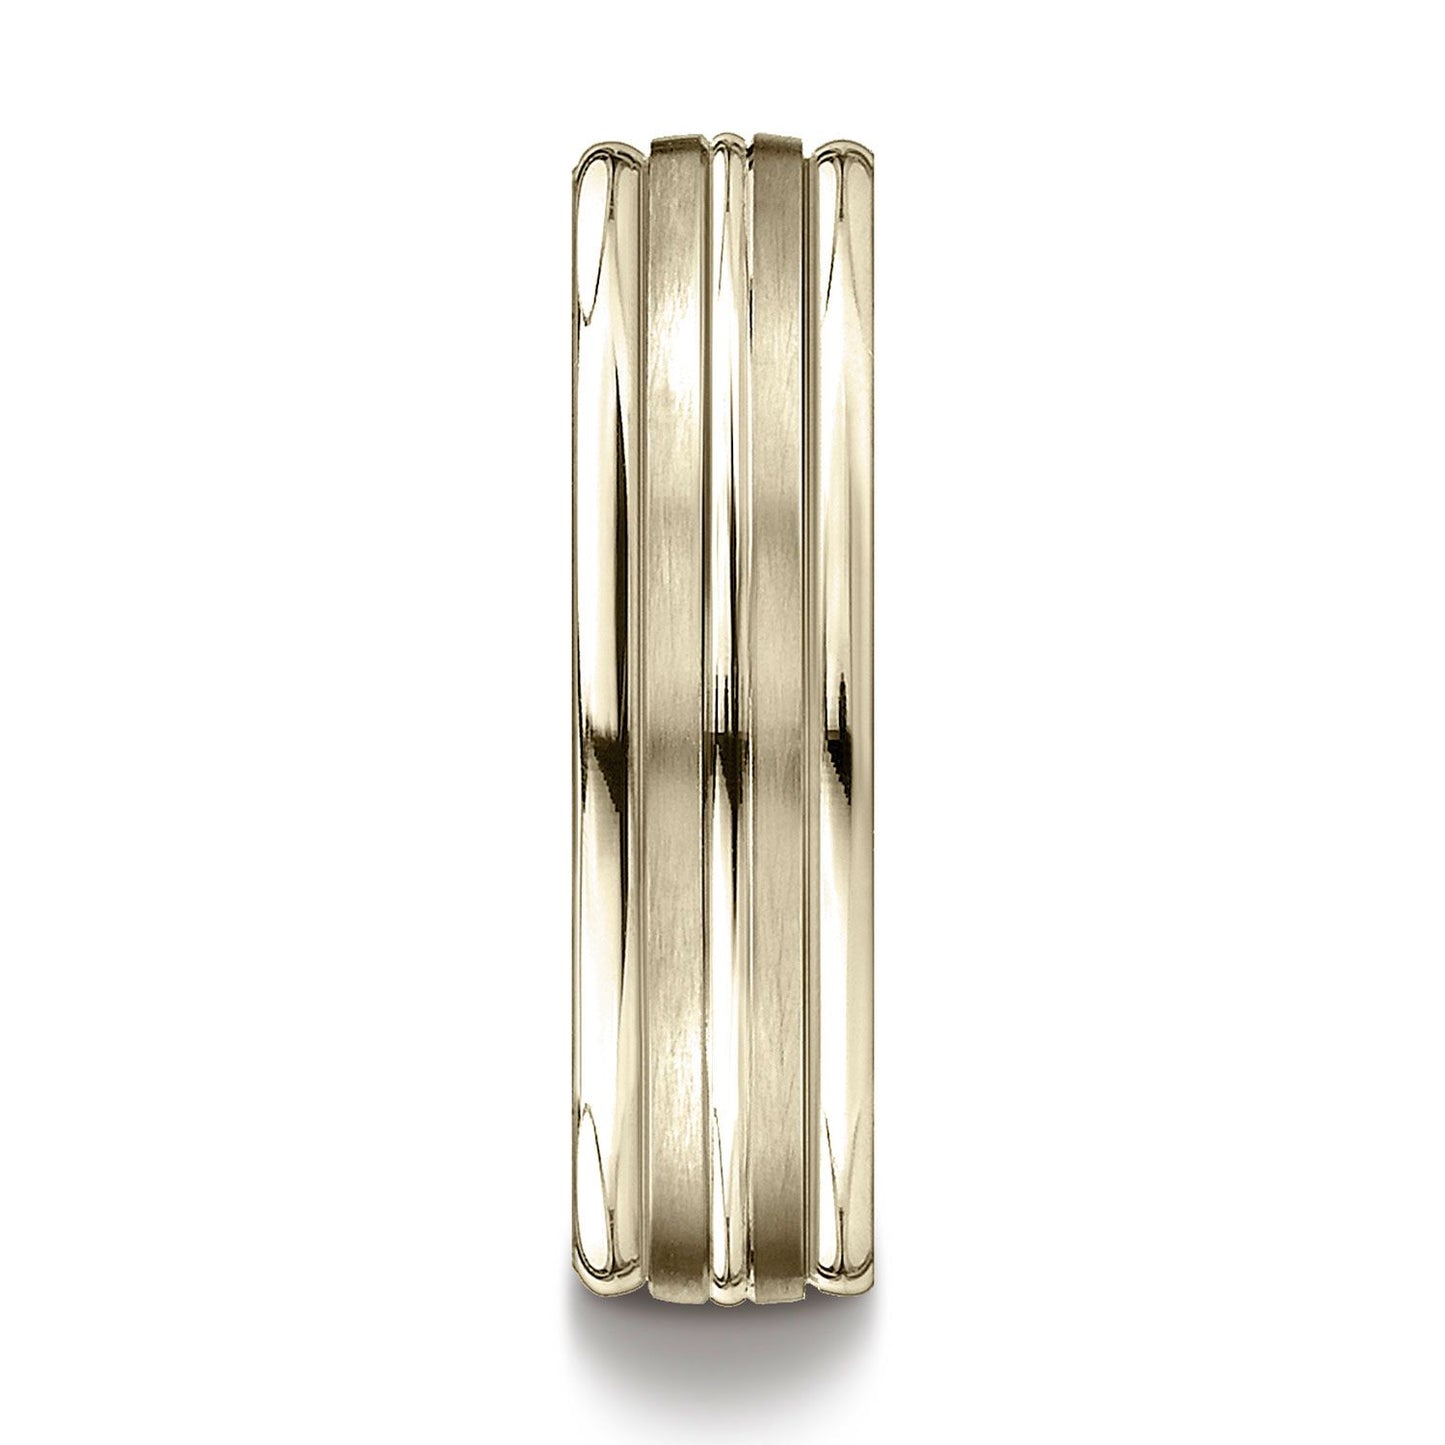 14k Yellow Gold 6mm Comfort-fit Satin-finished High Polished Center Trim And Round Edge Carved Design Band